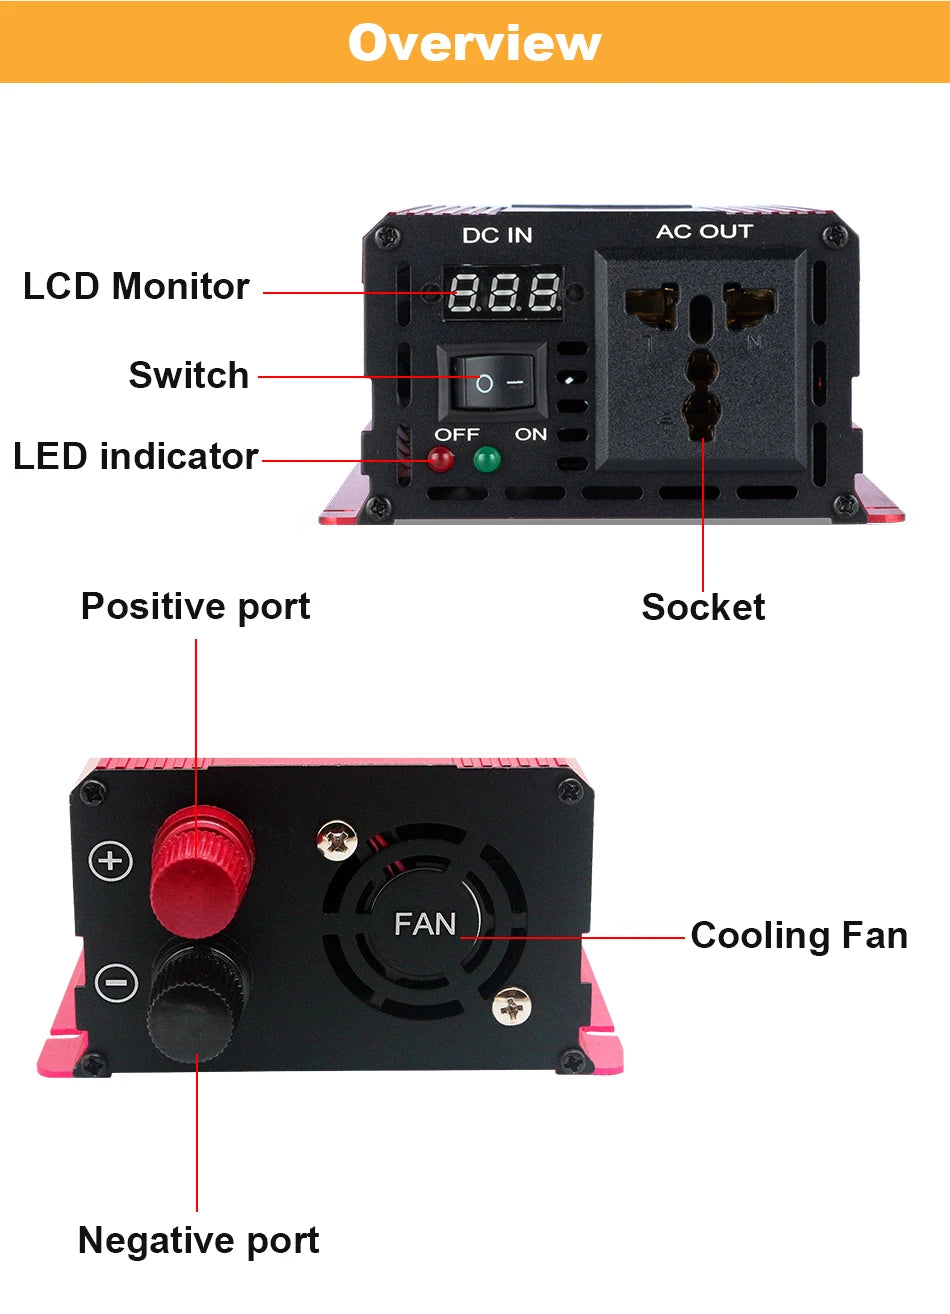 Pure Sine Wave Inverter converts DC to AC with 3000W output, LCD display, and port indicators.